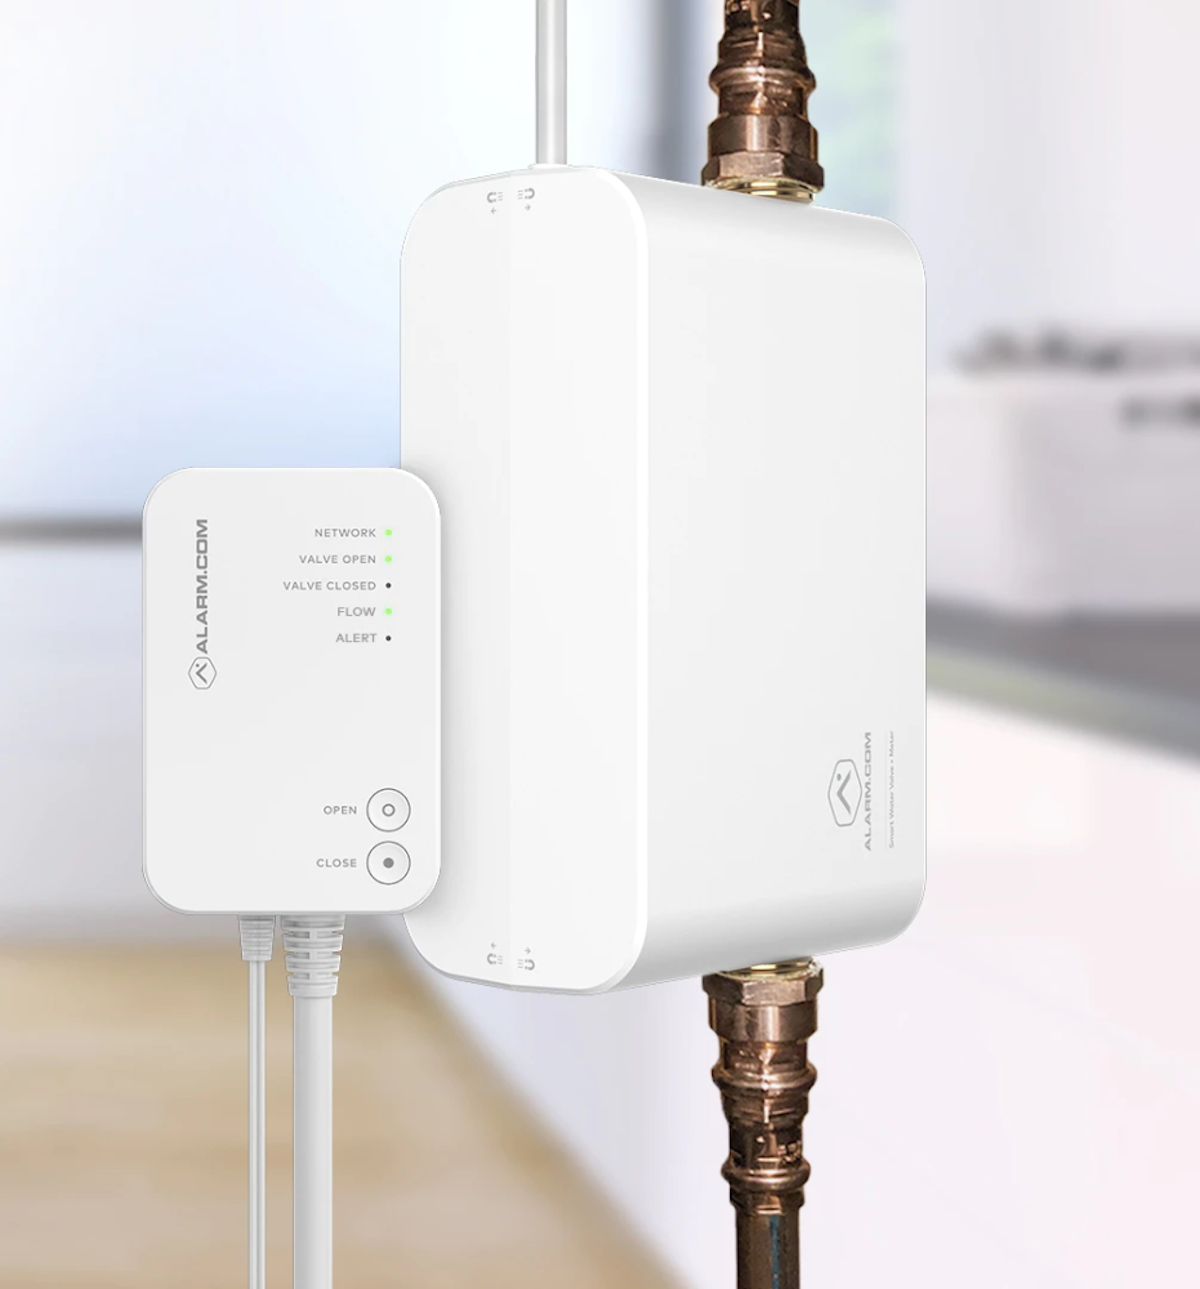 Alarm.com makes its Smart Water Valve+Meter available to service